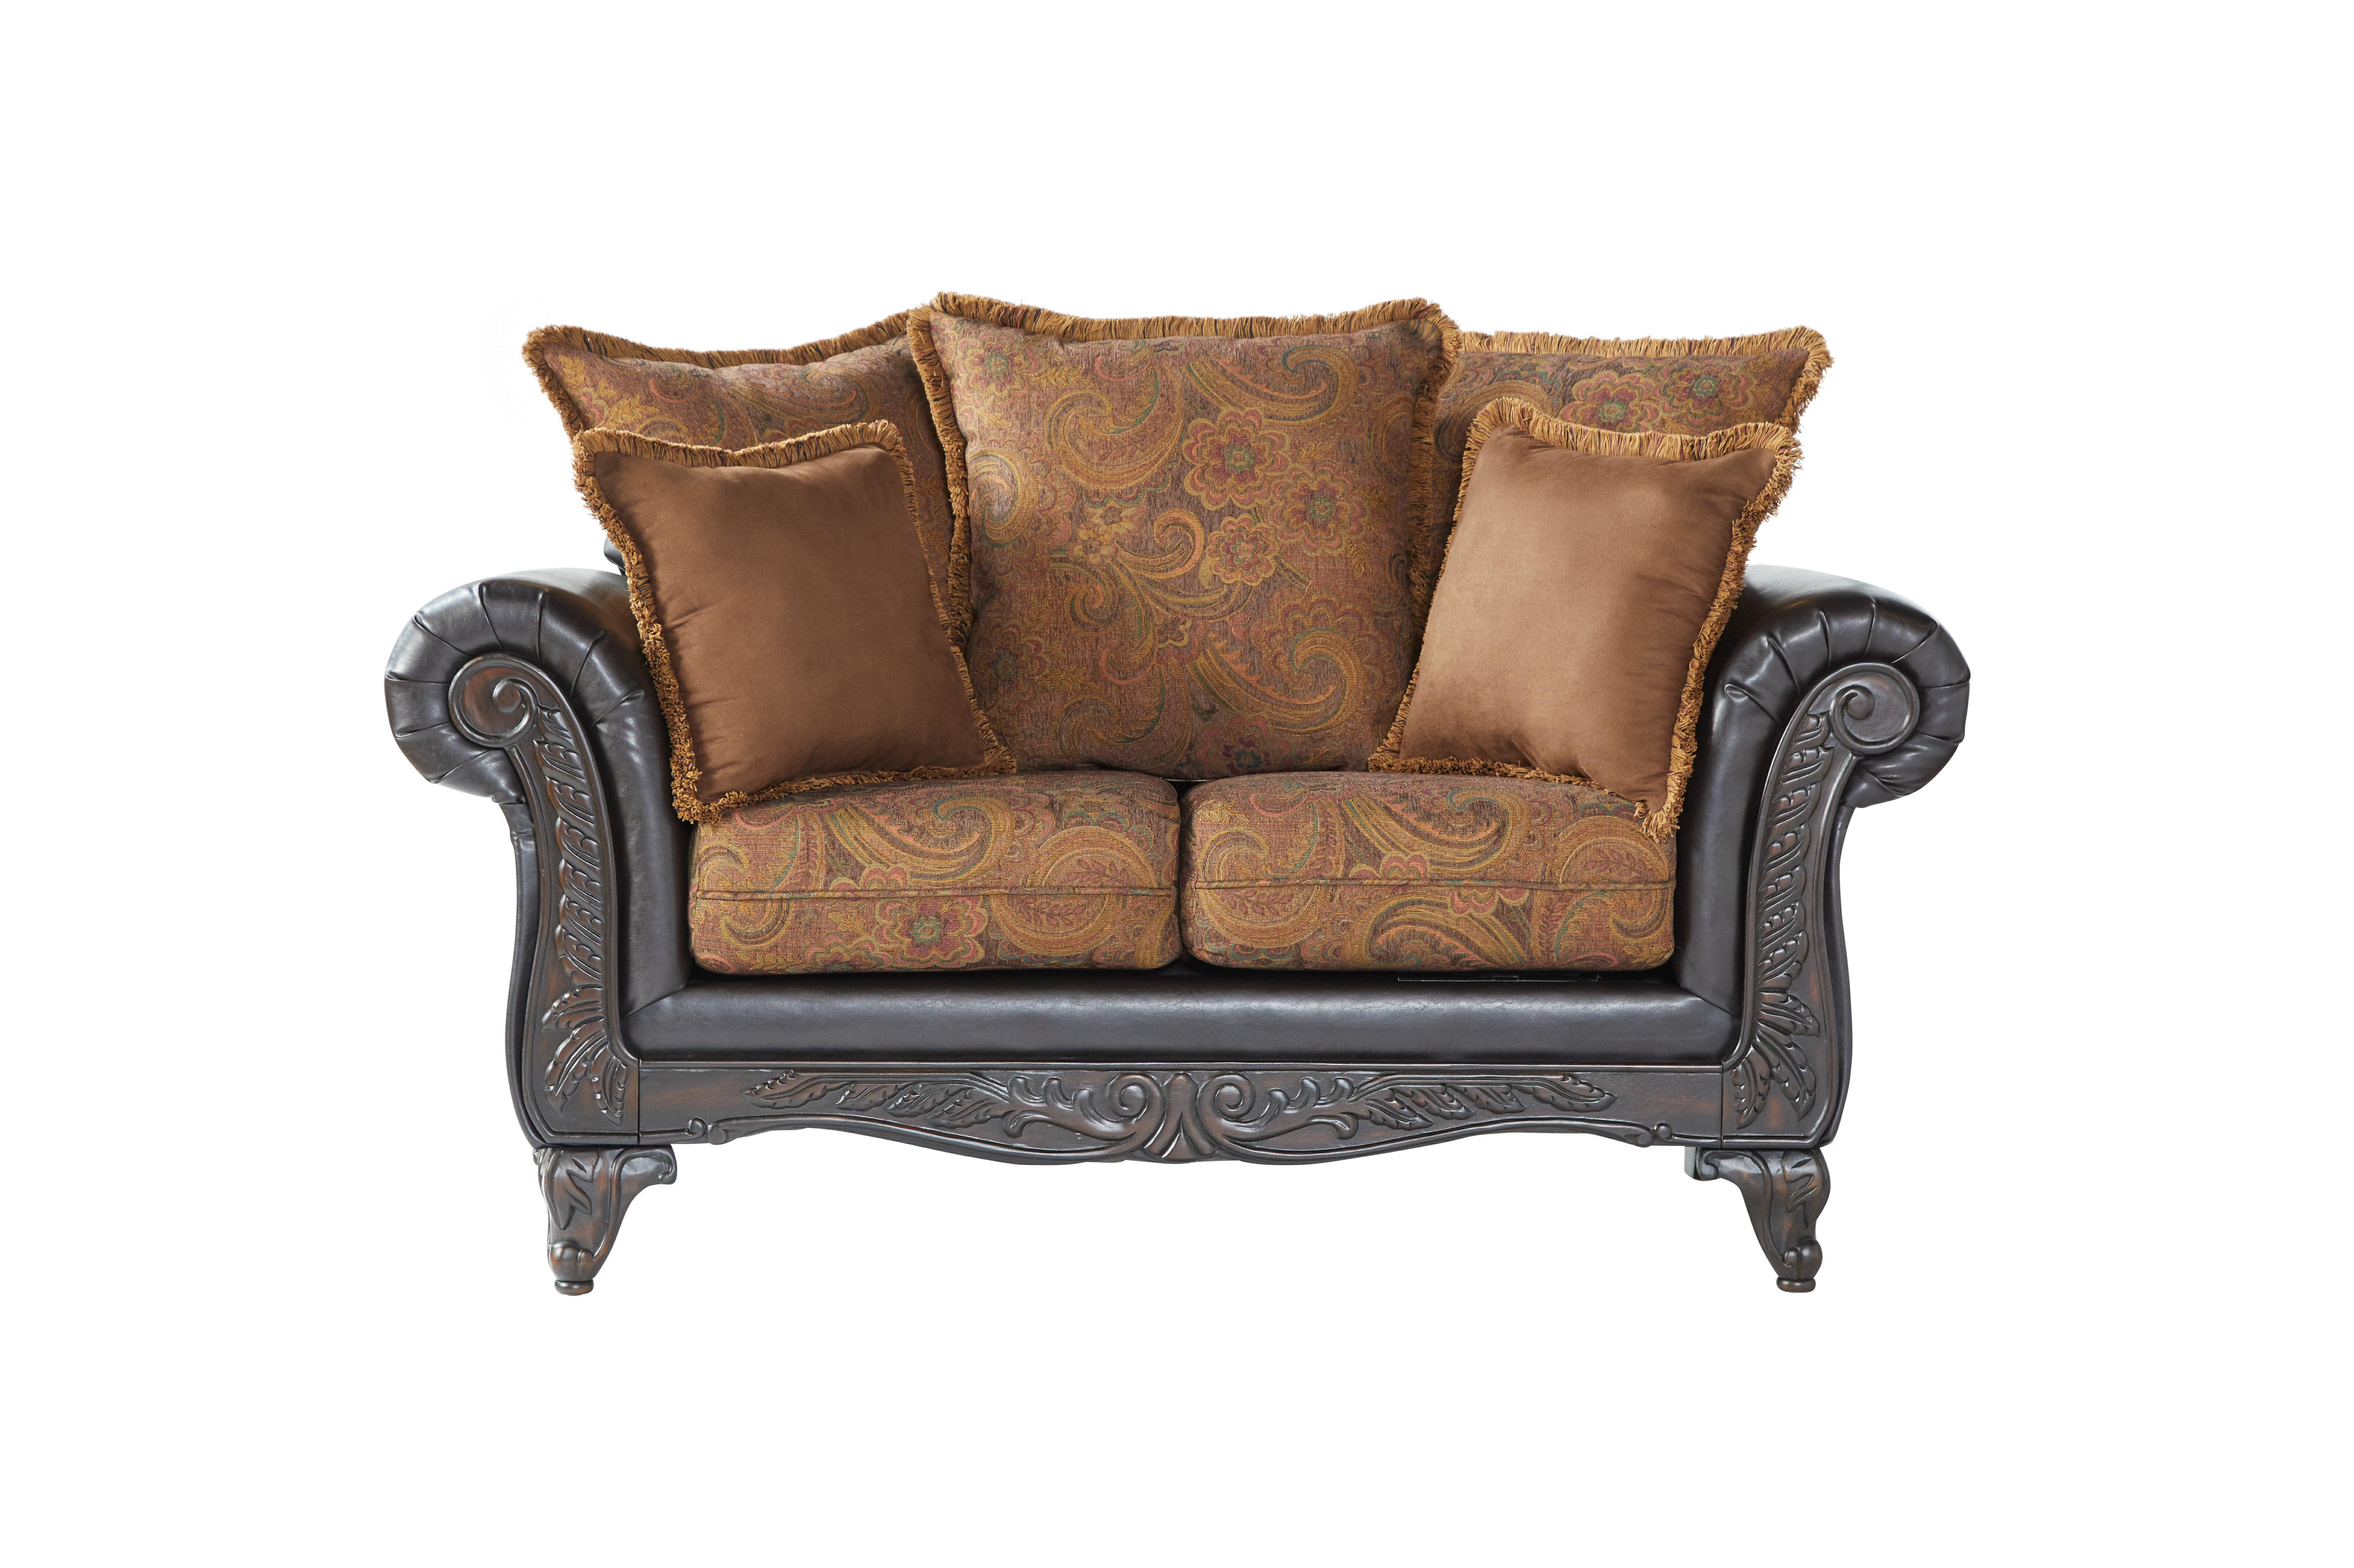 Gasaway 71” Flared Arm Loveseat with Reversible Cushions